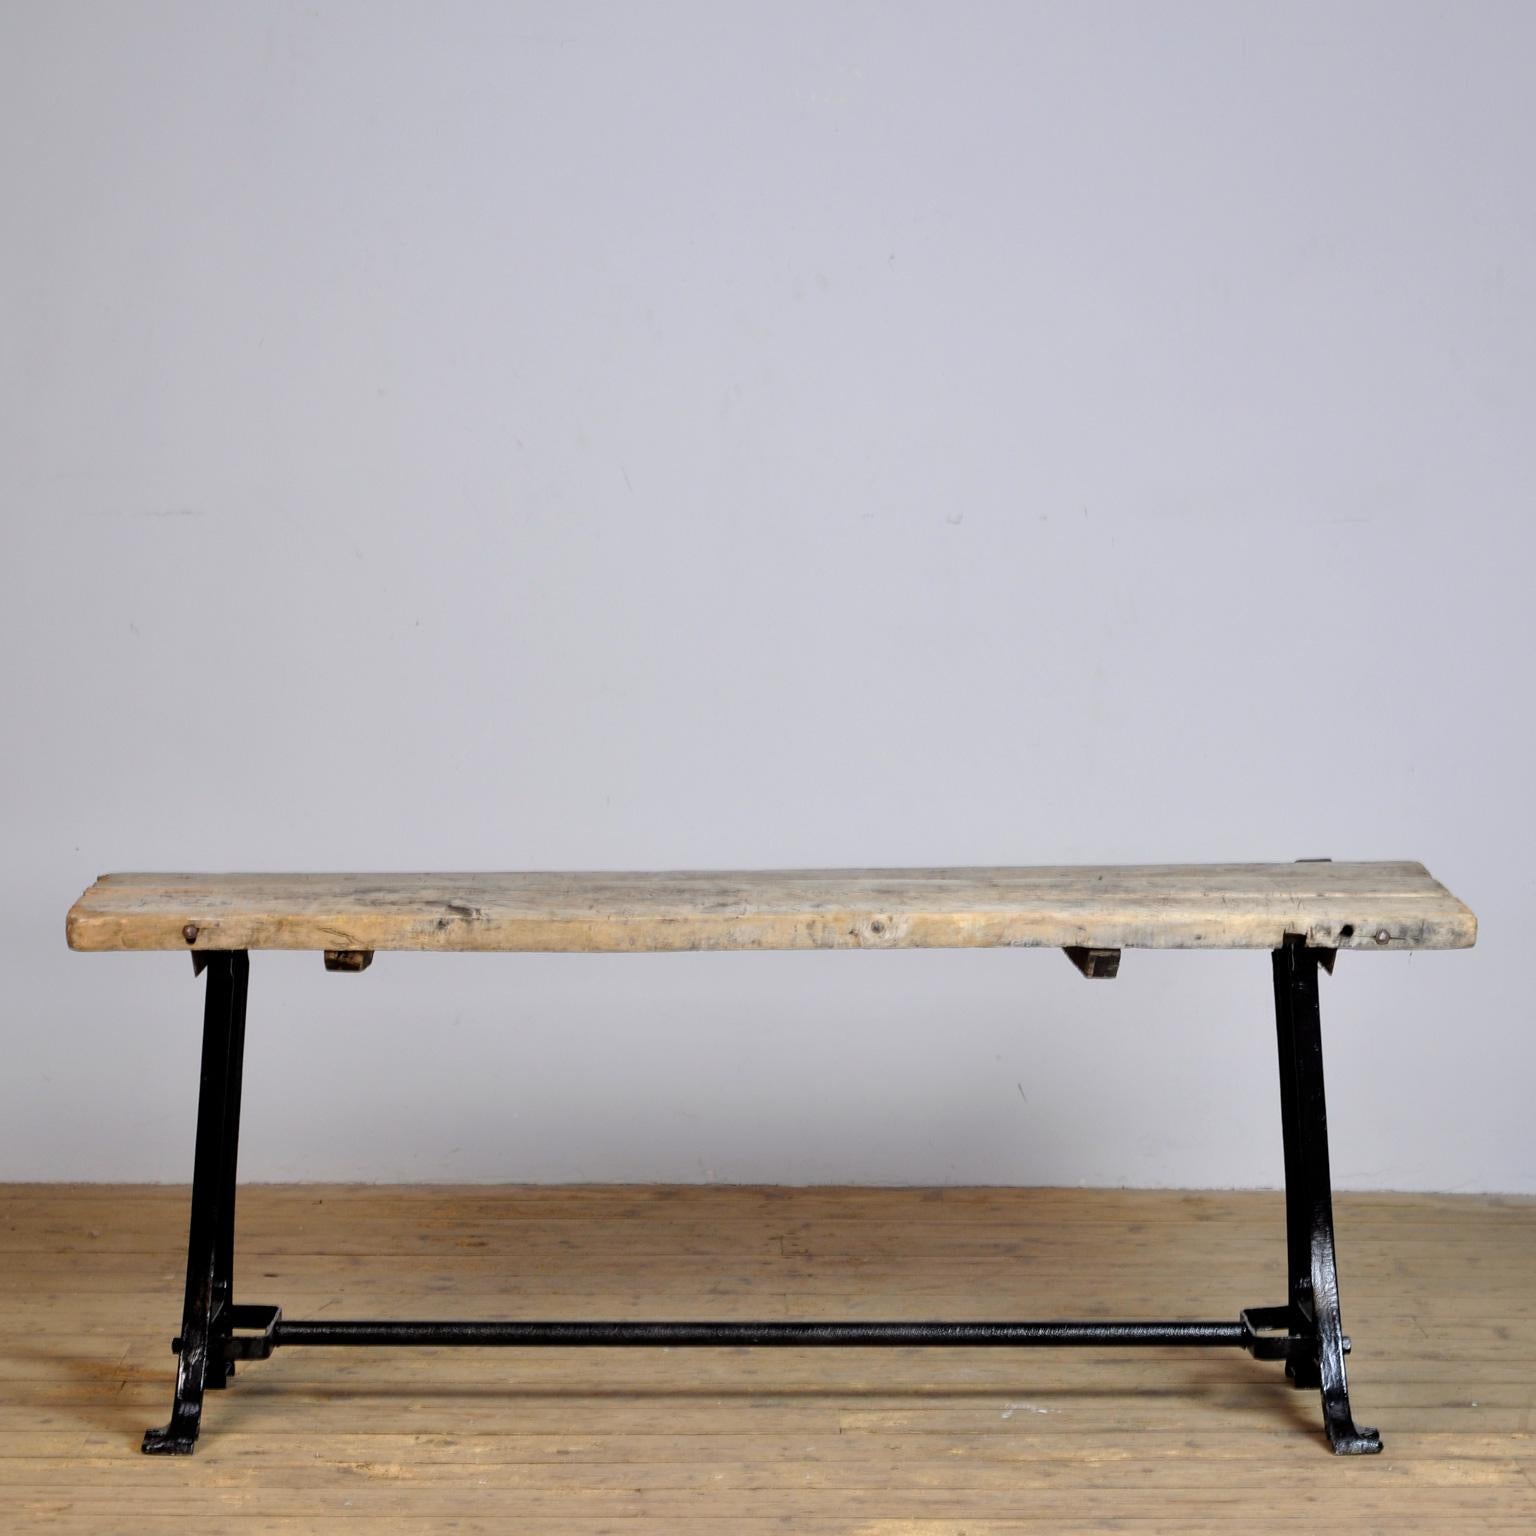 This industrial table is made from an old cast iron machine base and a weathered wooden top.